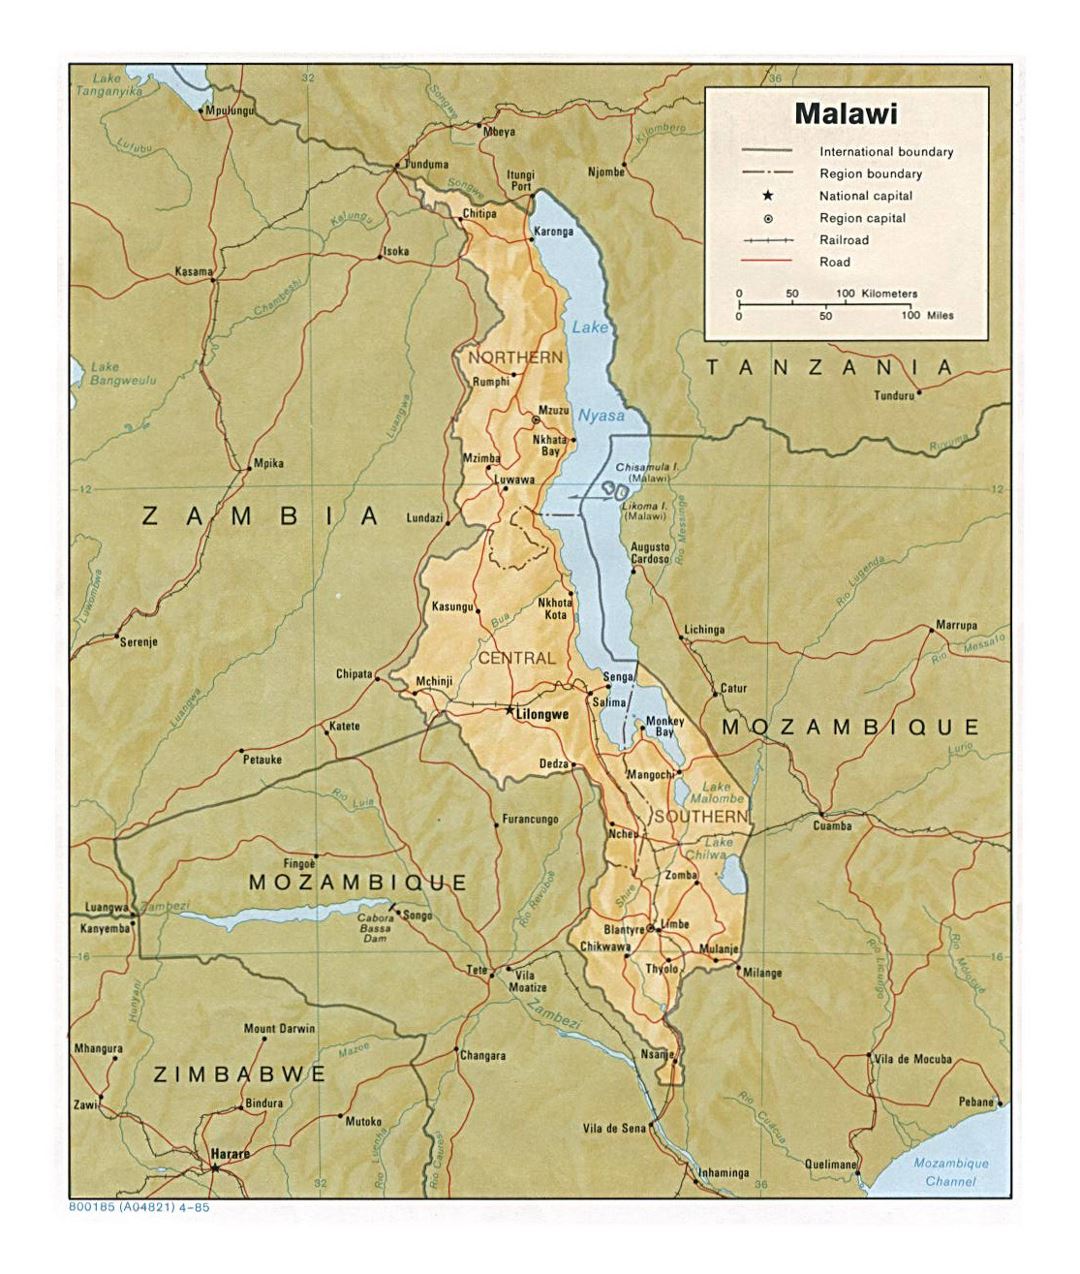 Detailed political and administrative map of Malawi with relief, roads, railroads and major cities - 1985